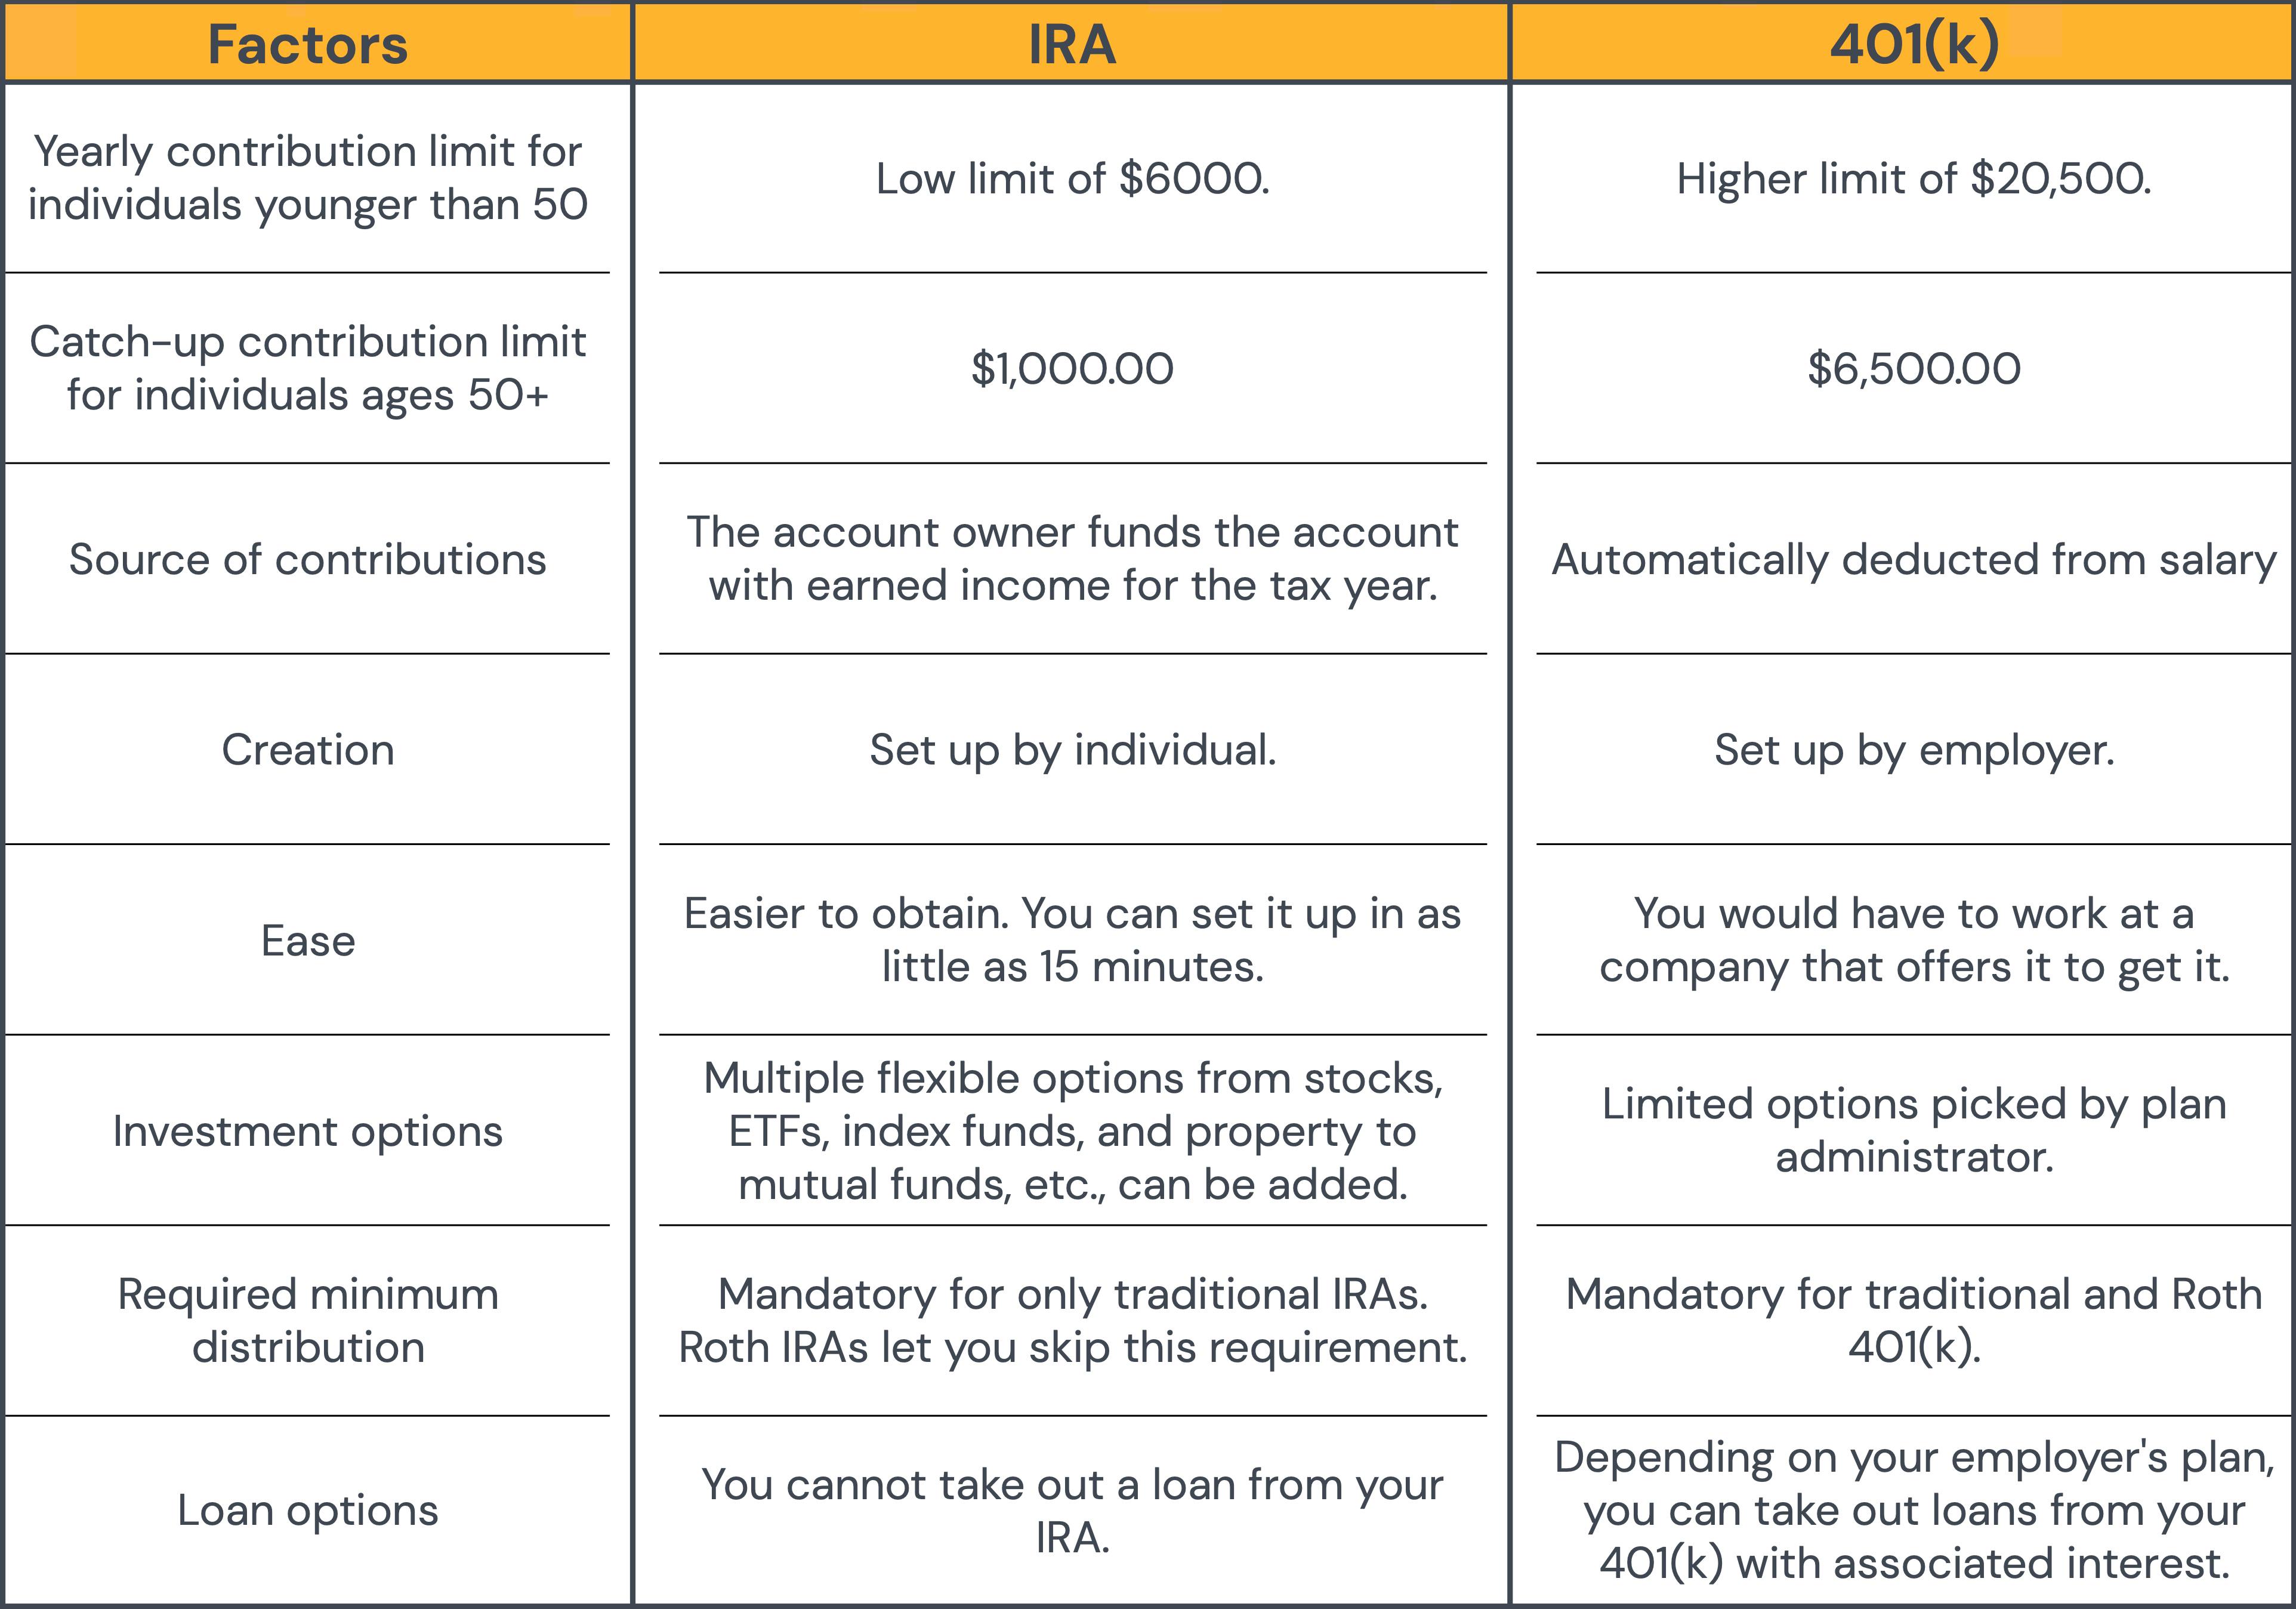 Table comparing IRA and 401(k)